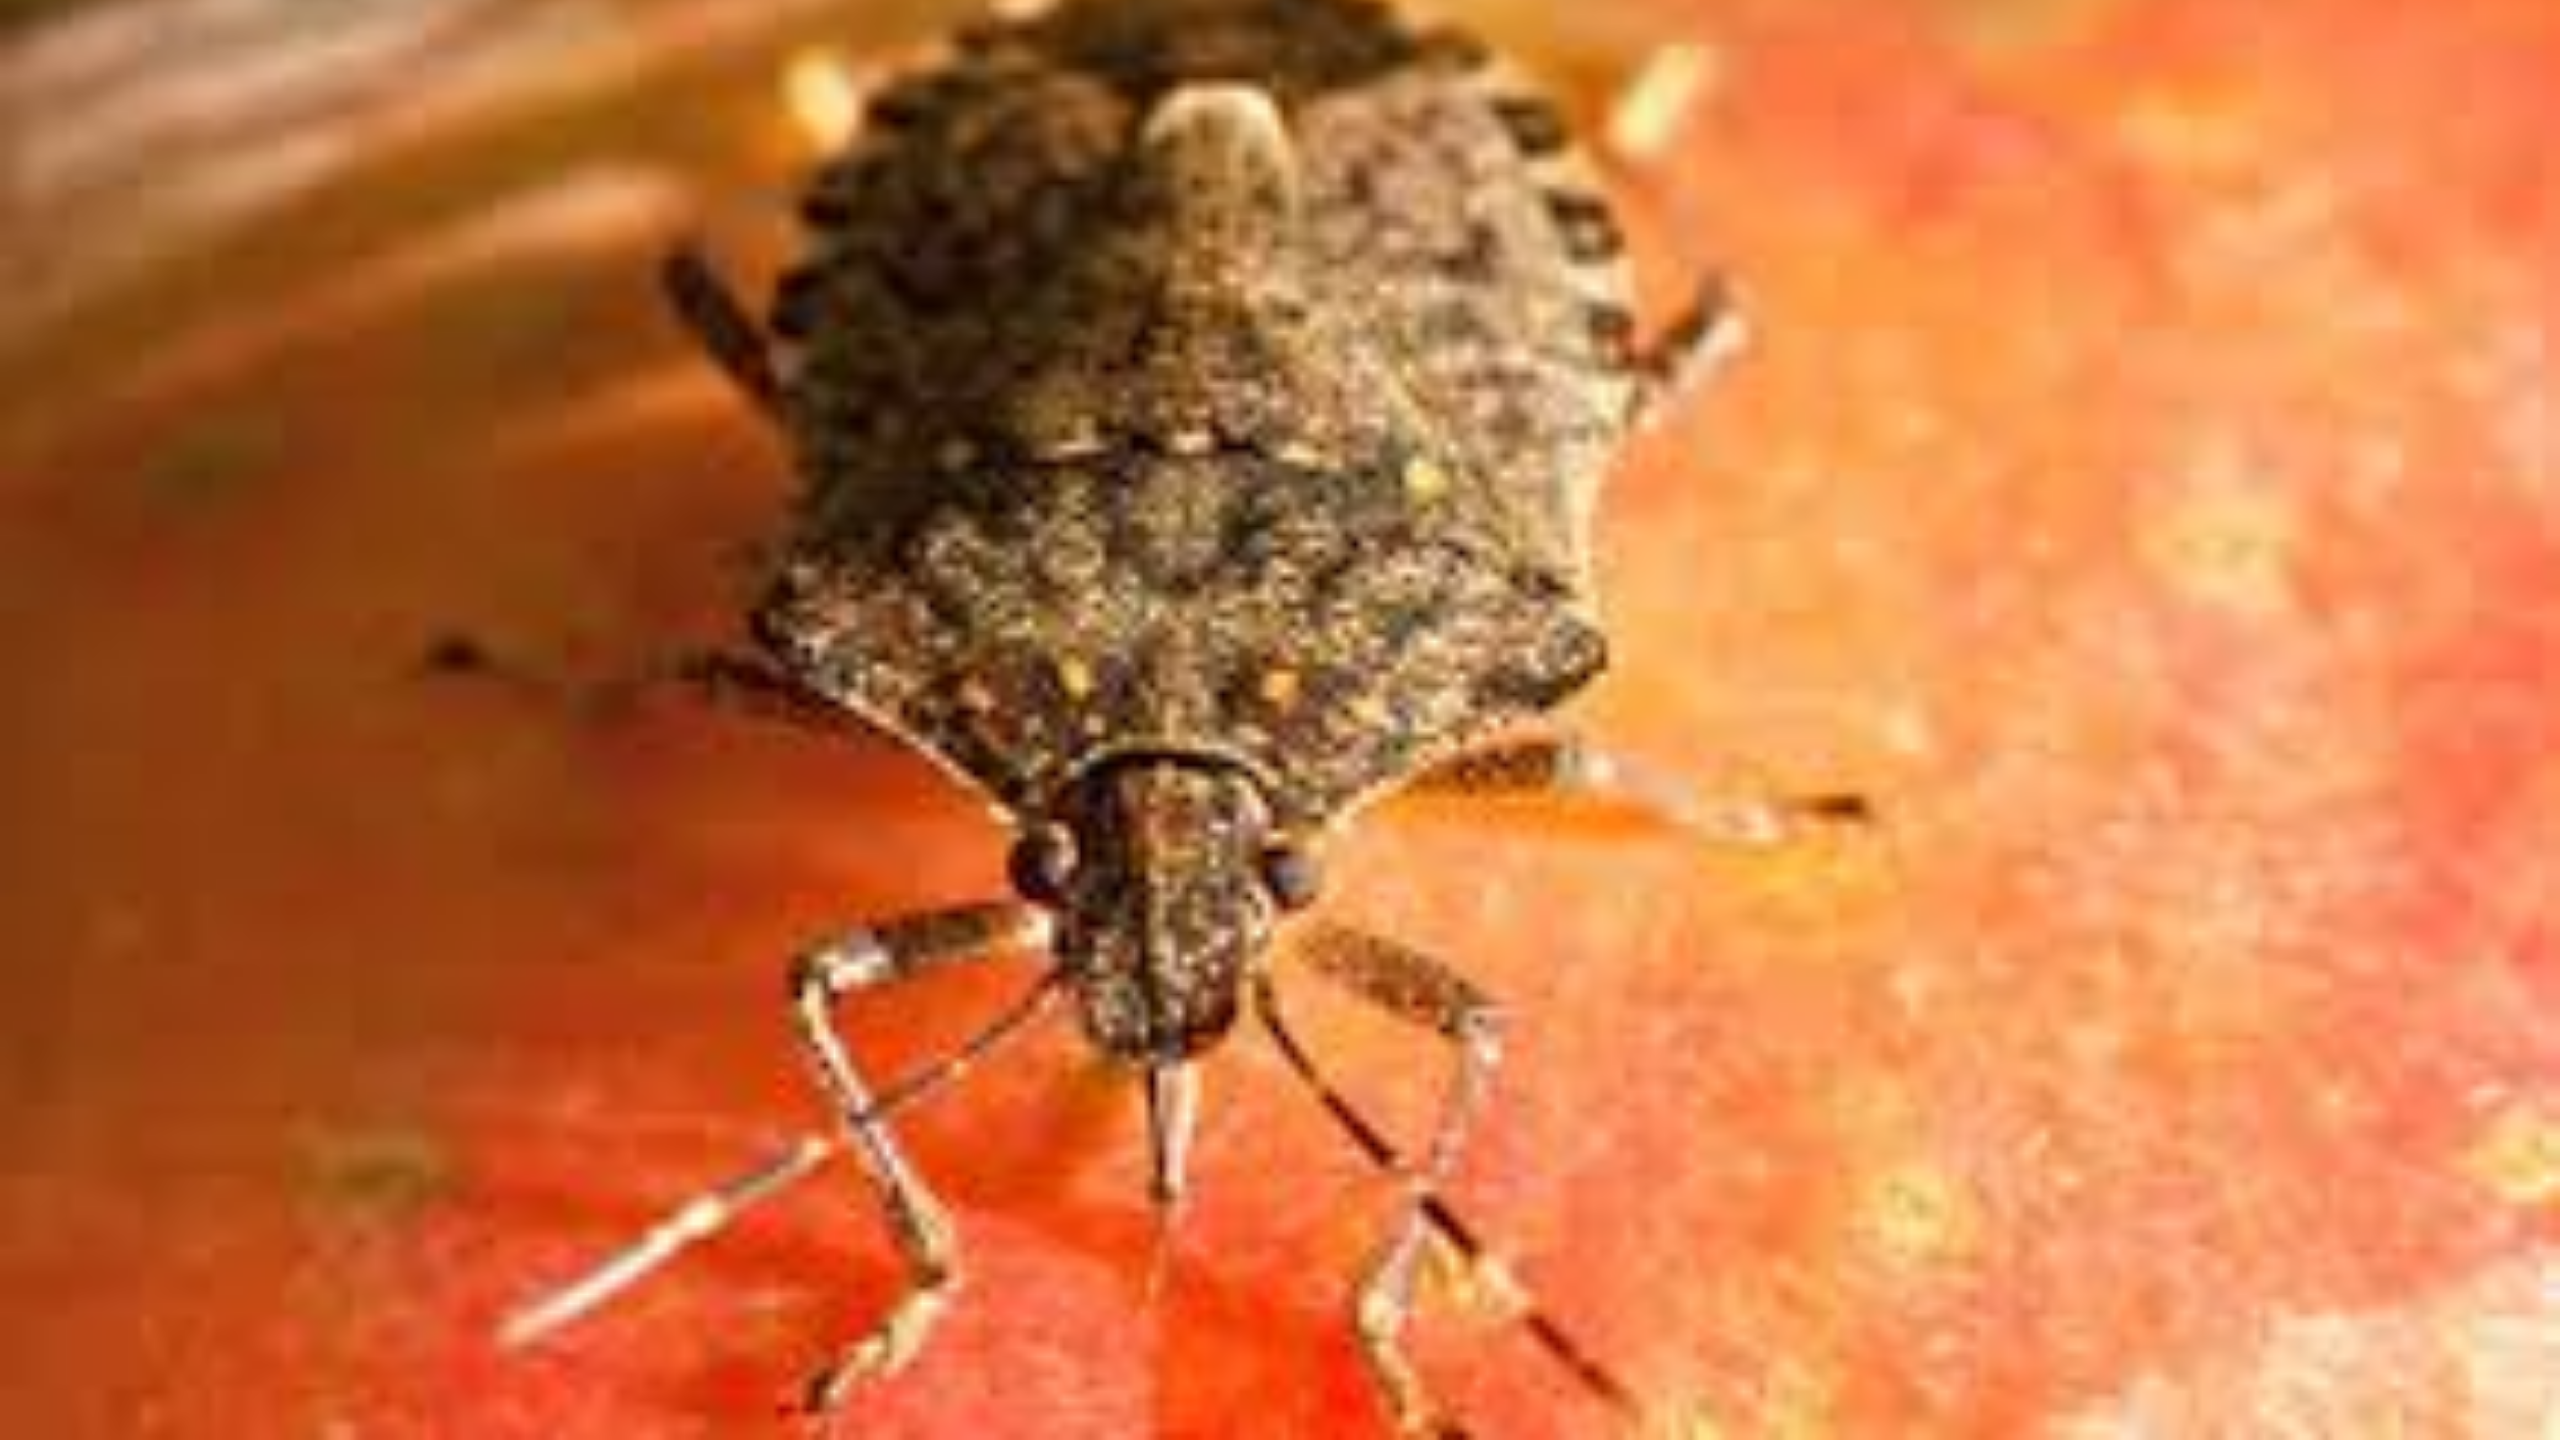 Adult brown marmorated stink bug (BMSB).